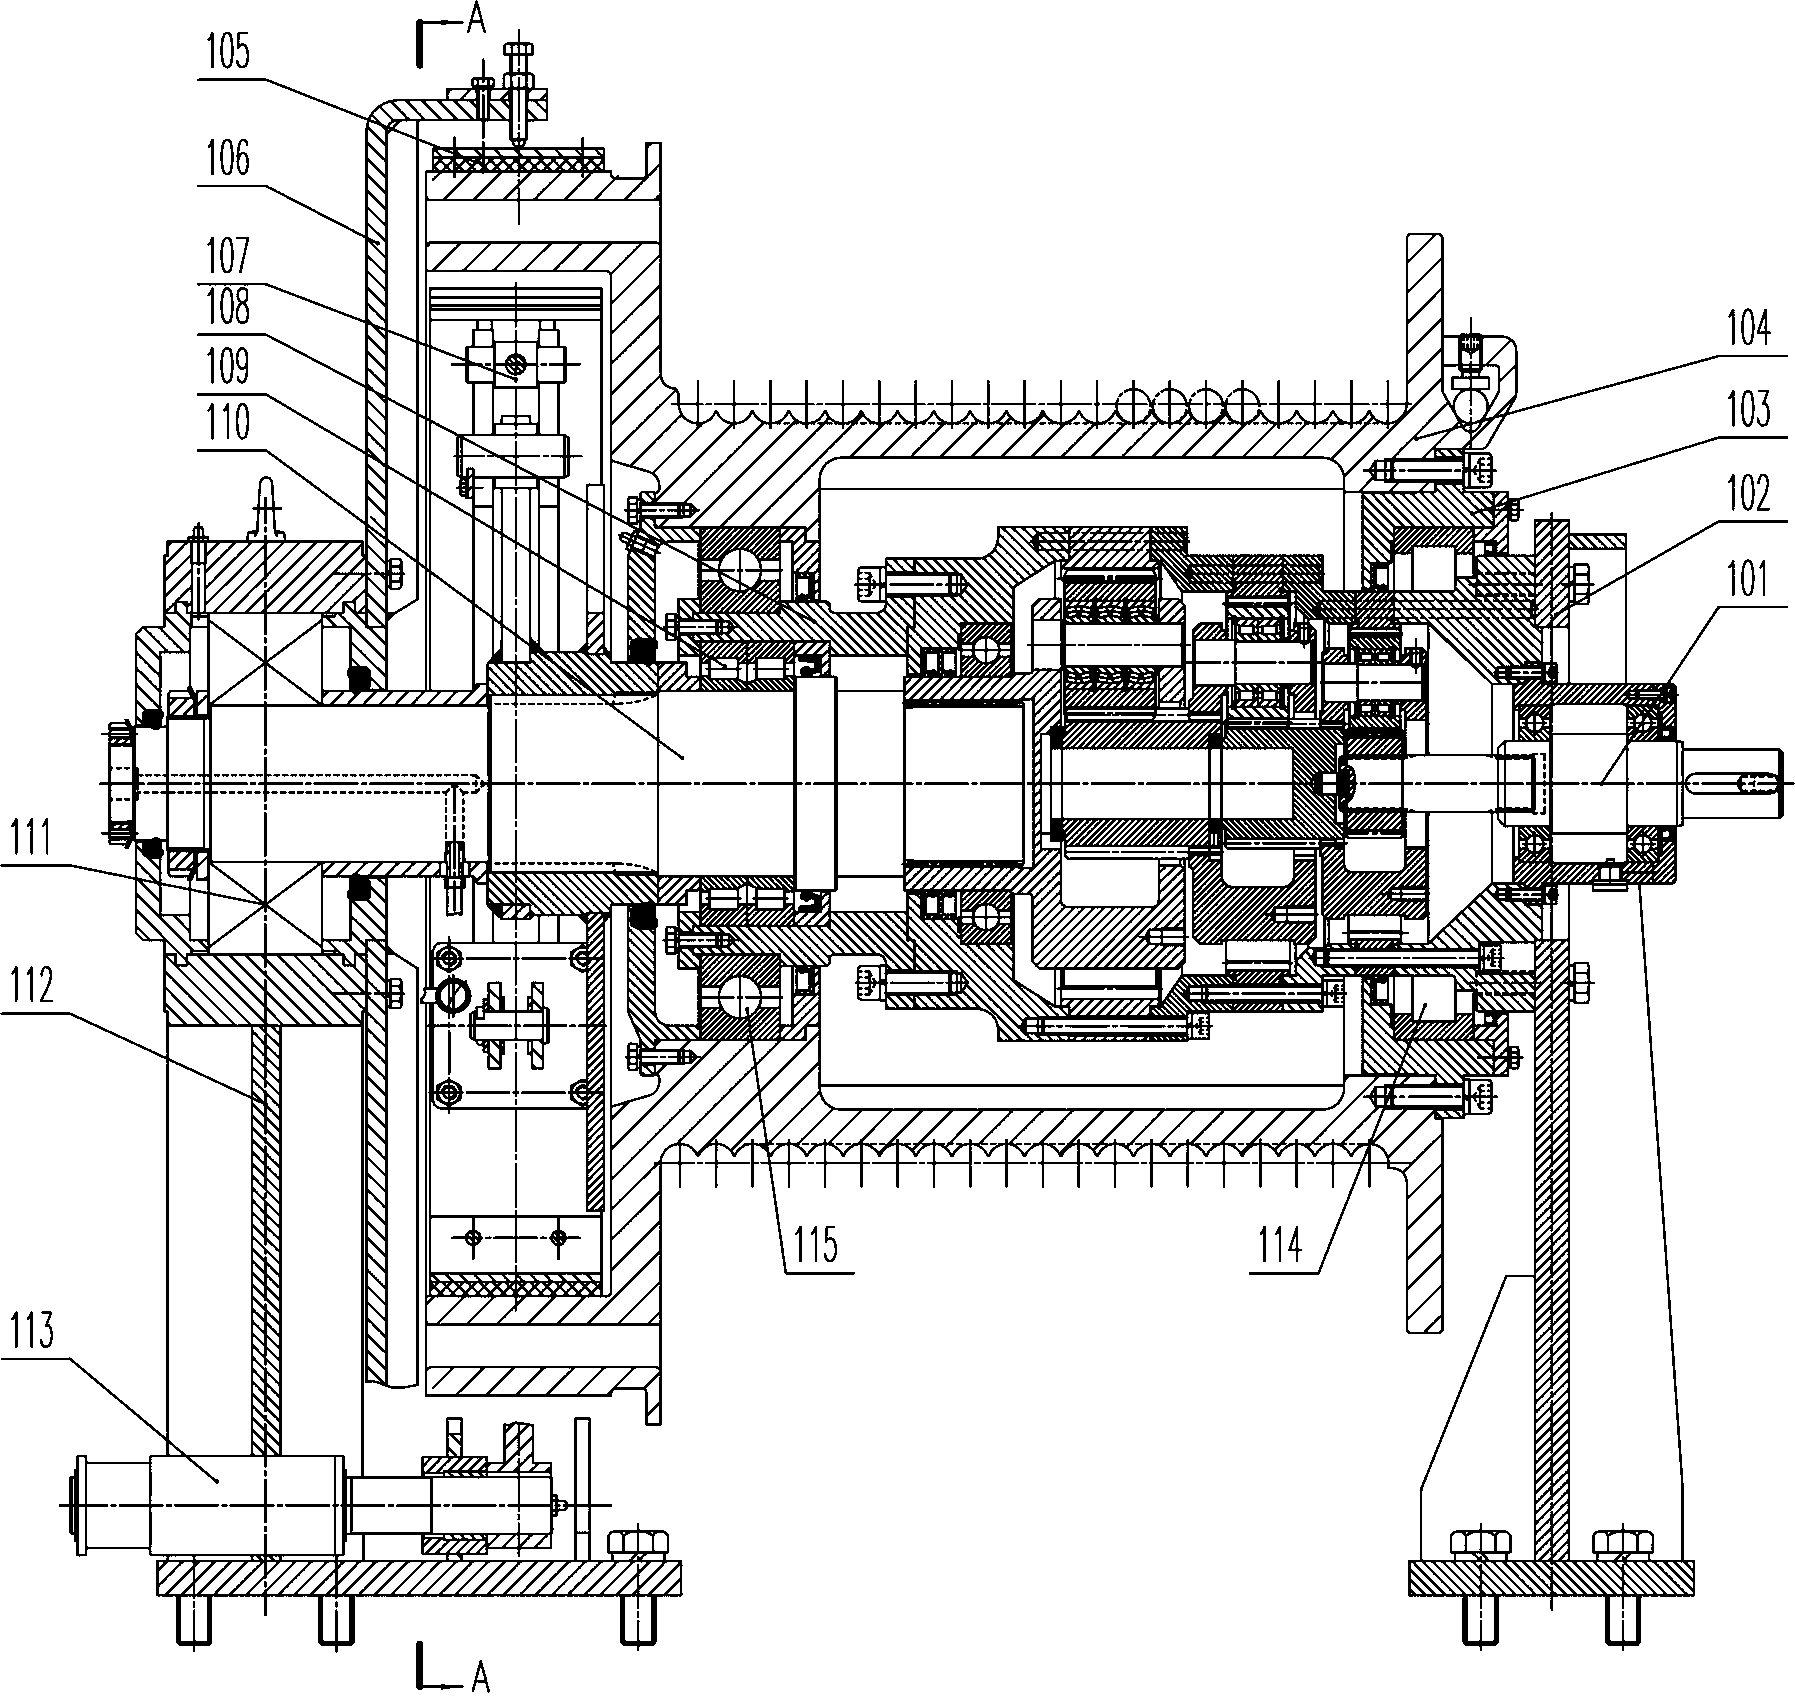 Speed-controllable gravity lowing winch provided with built-in gear reducer